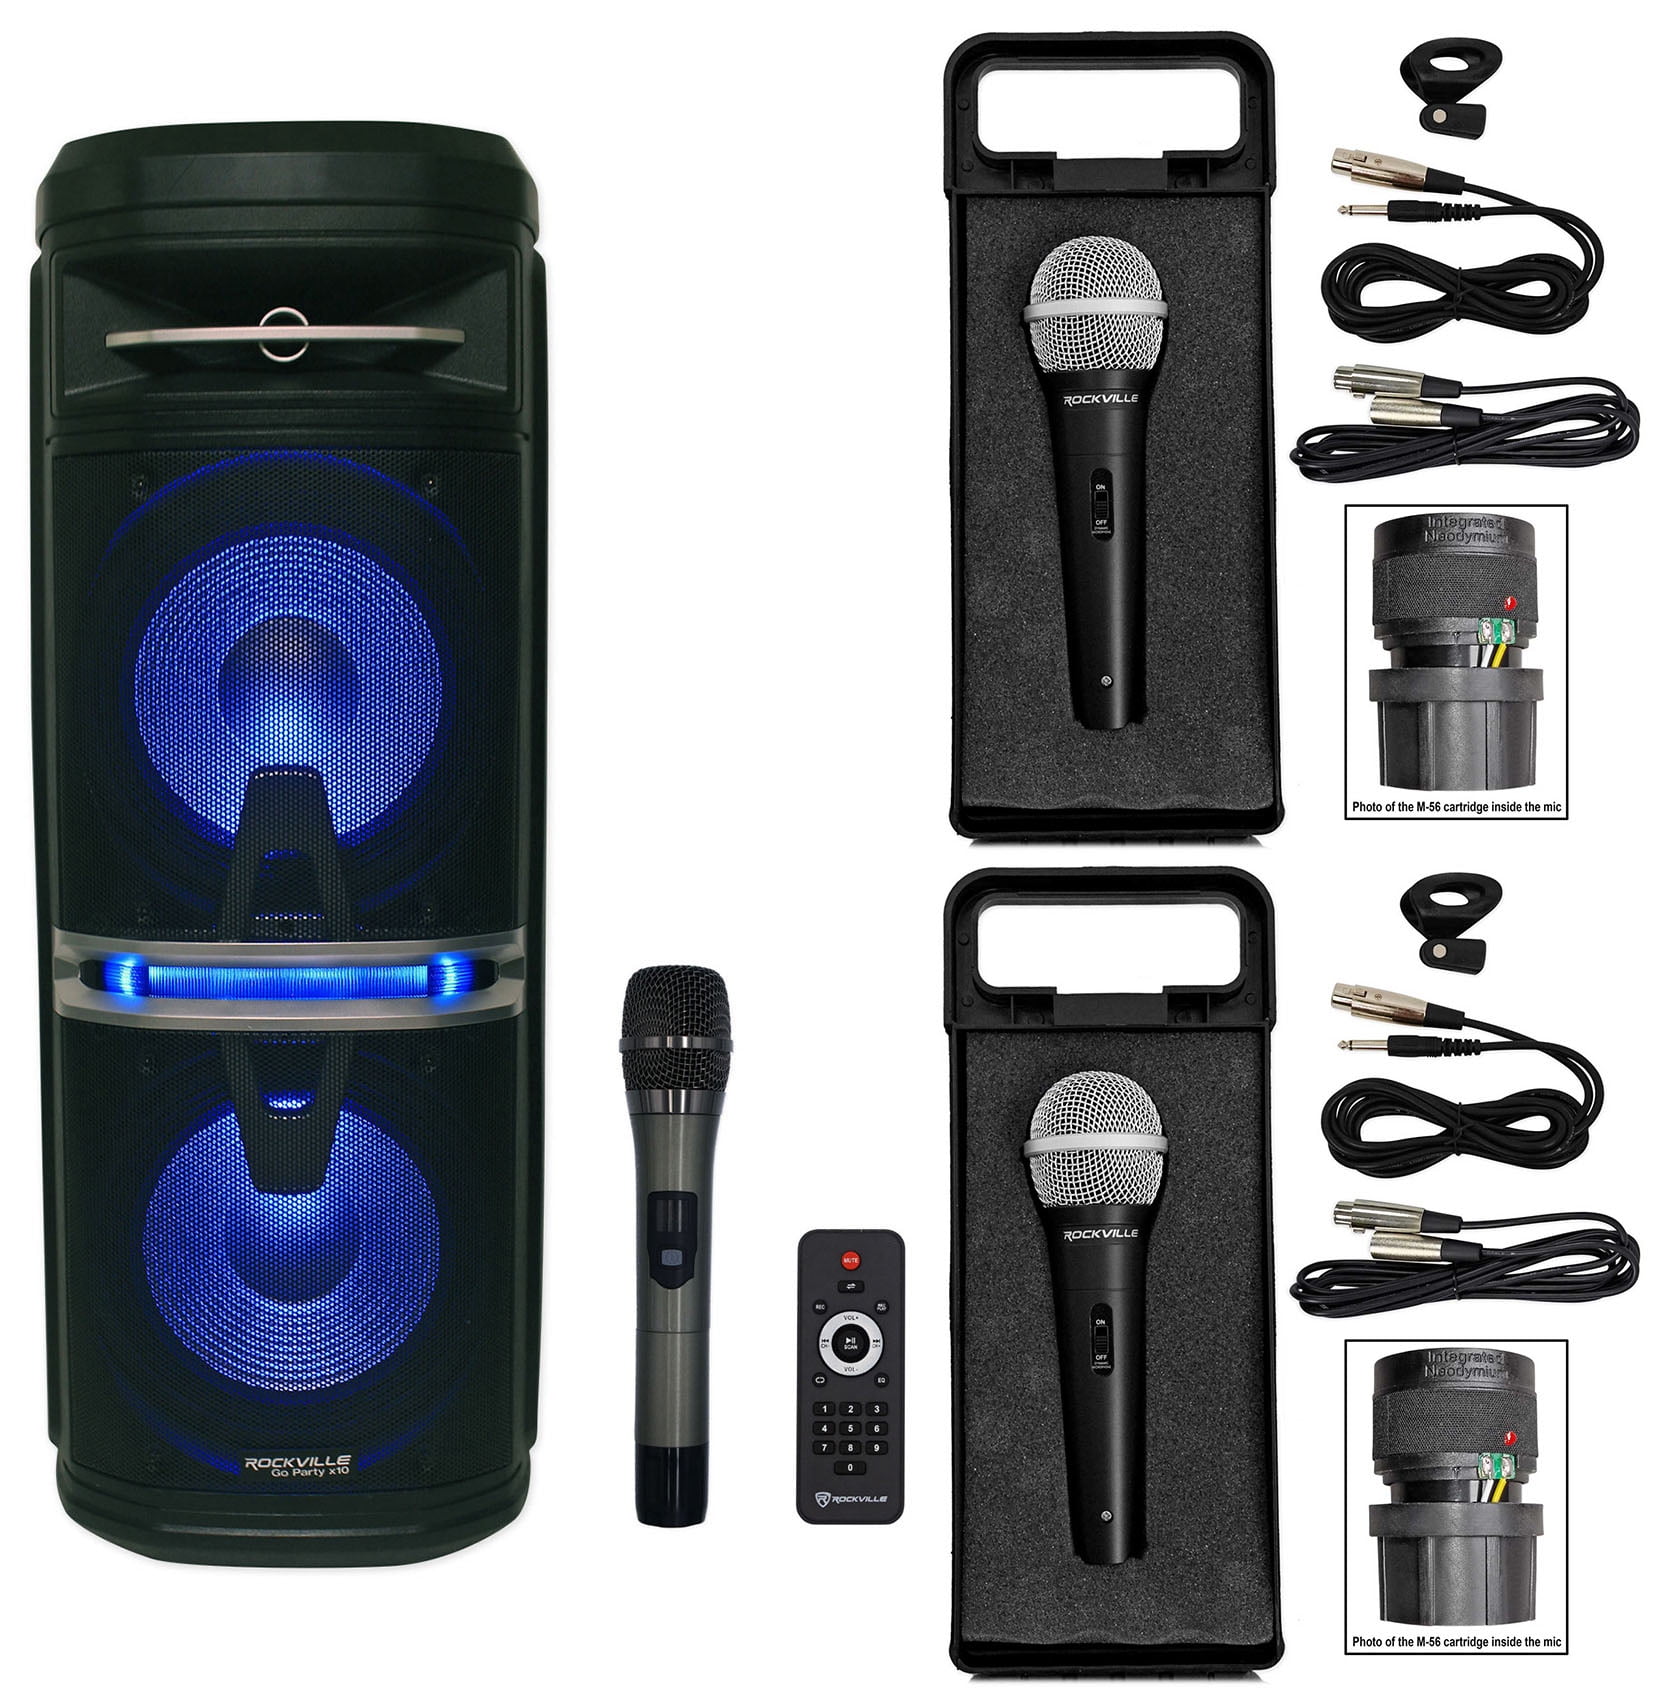 STARQUEEN 10Inch Pa System,Karaoke Machine for Party,DJ and Outdoor Activities,Rechargeable Party Speaker with 2 UHF Wireless Microphones 